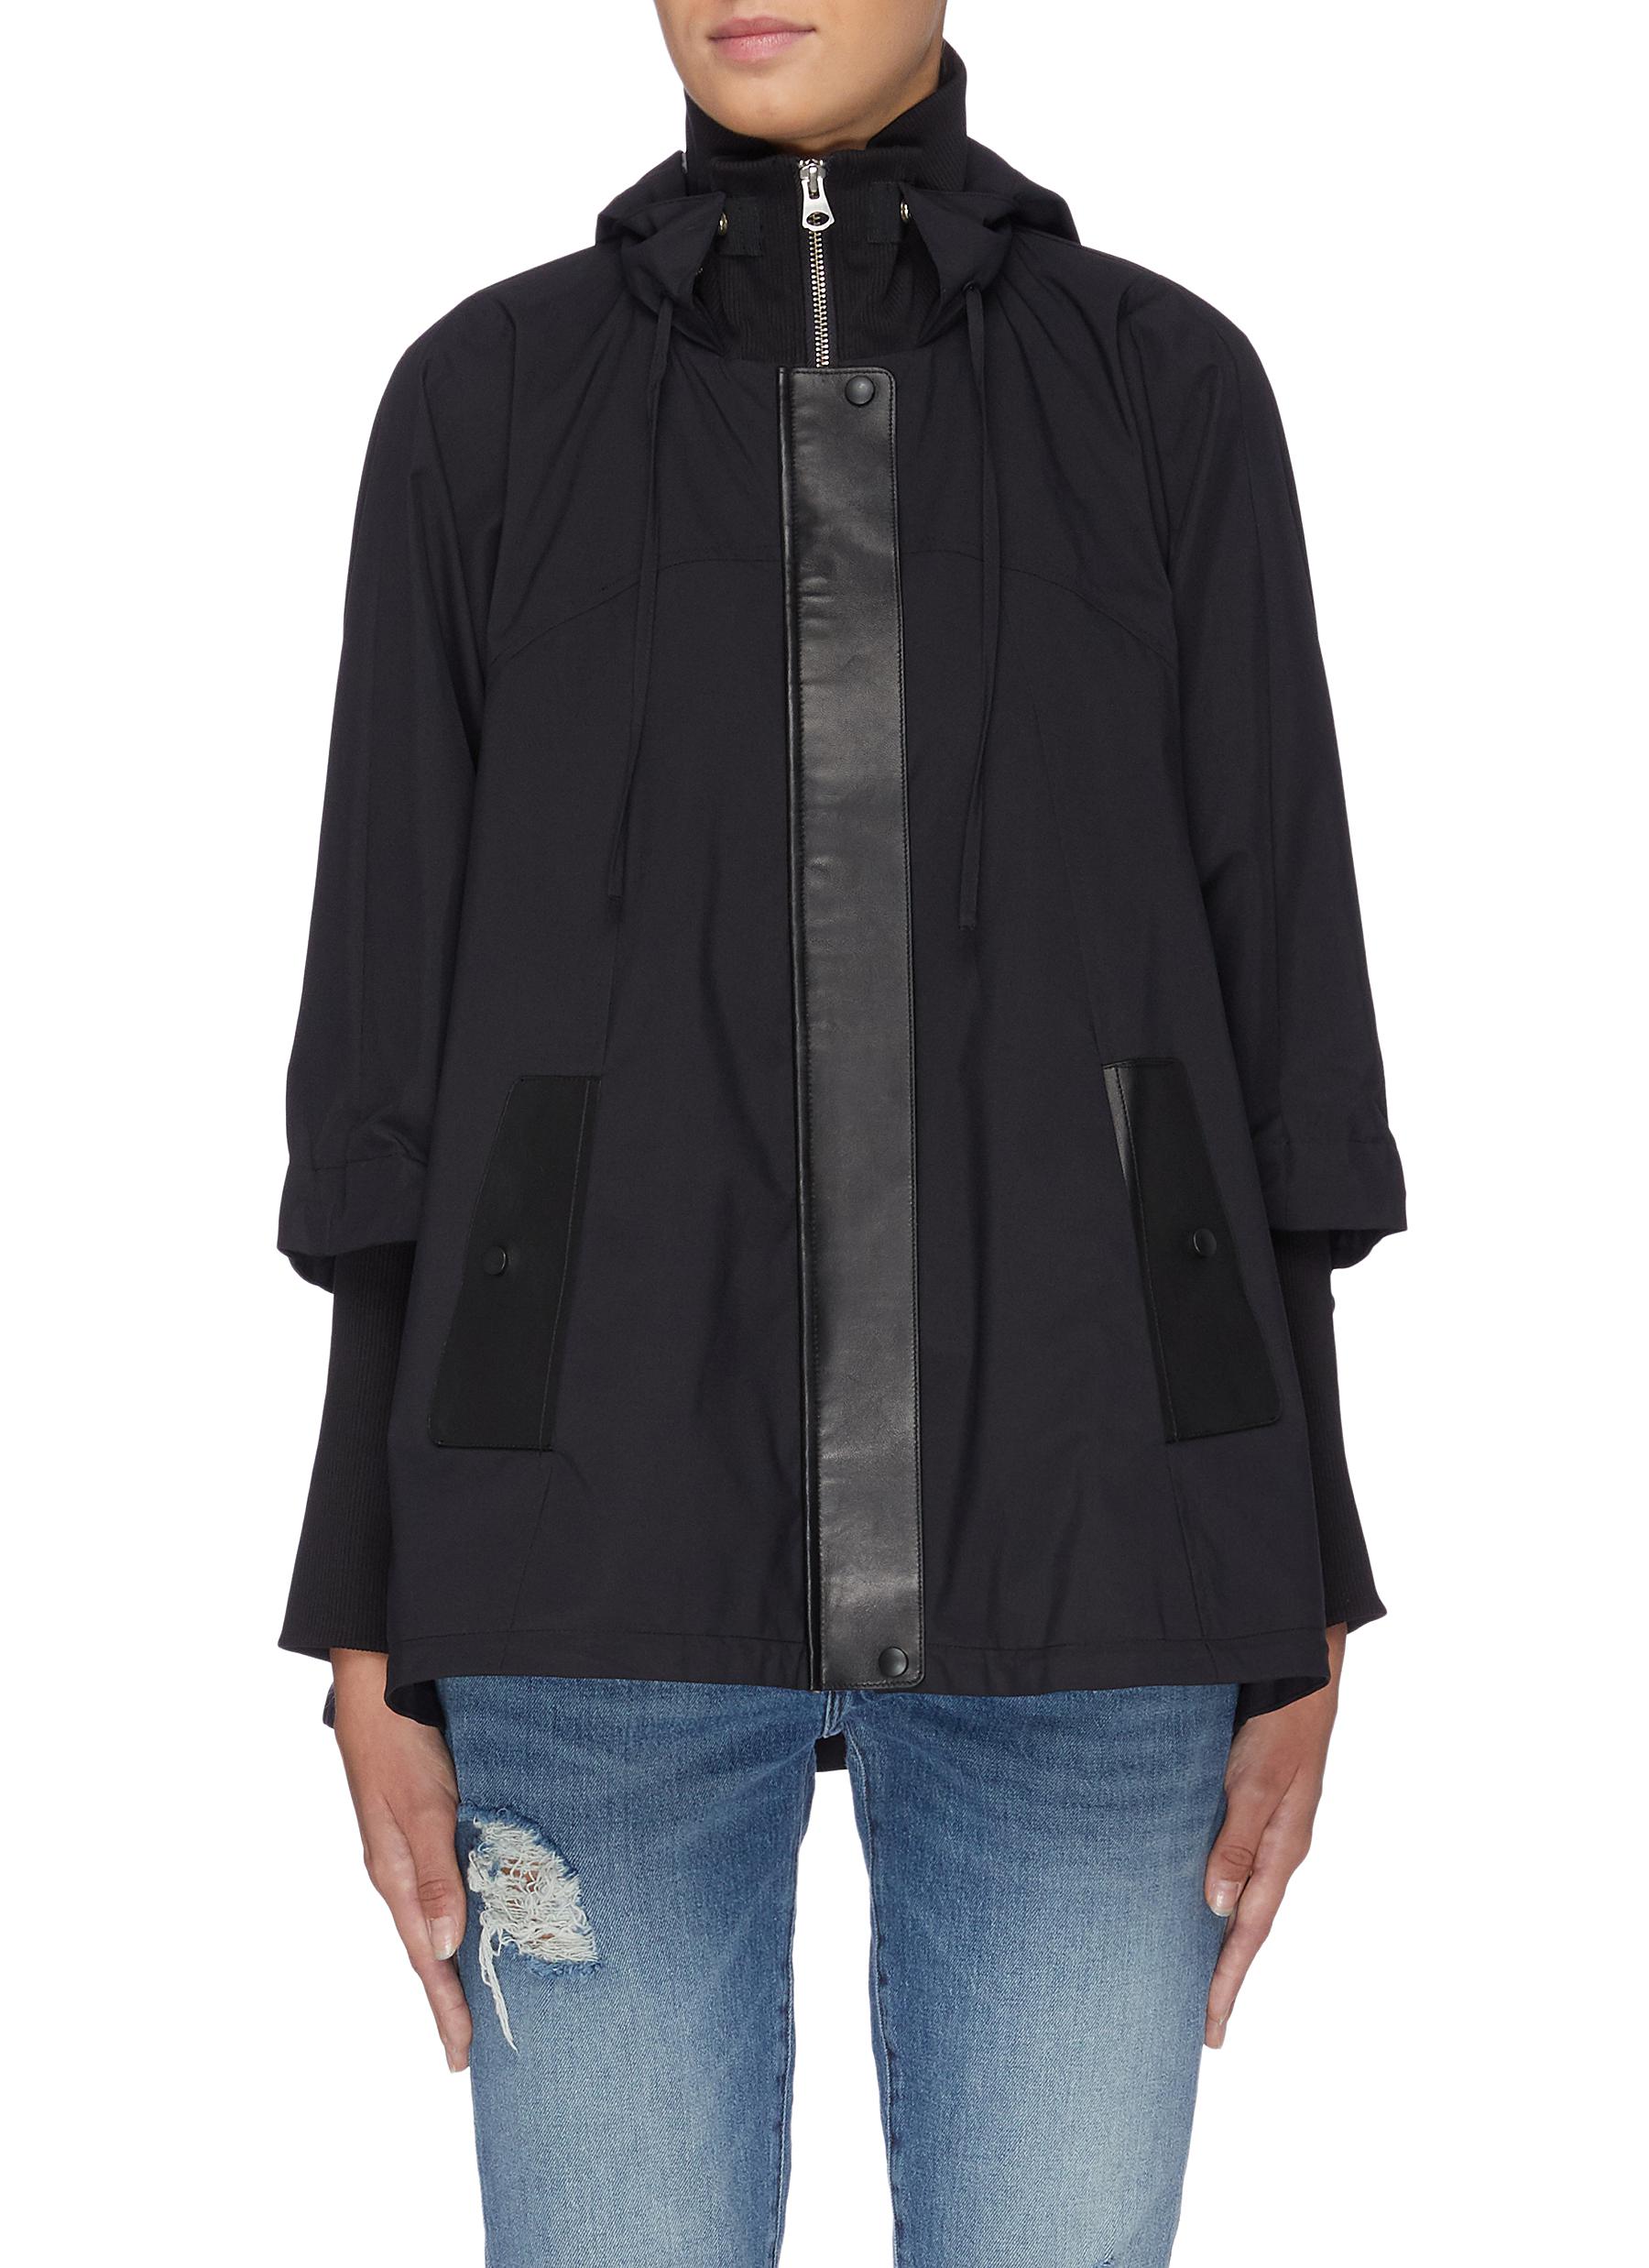 Hooded ruched collar jacket by Short Sentence